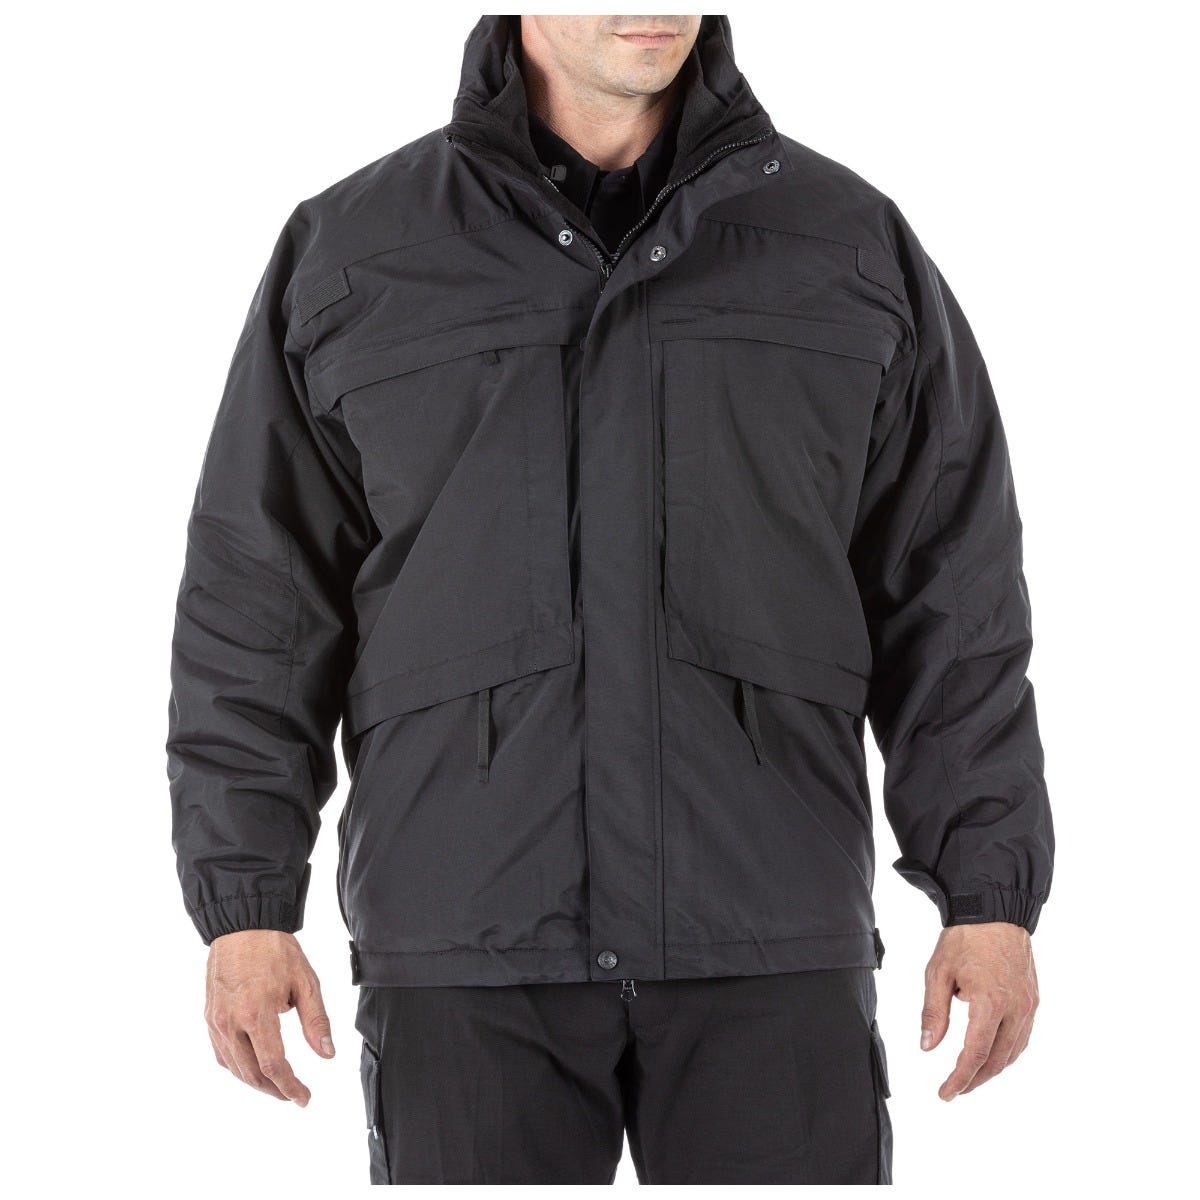 Style 48017T Multi-Purpose Details about   5.11 Tactical Men's Weatherproof 5-in-1 Jacket 